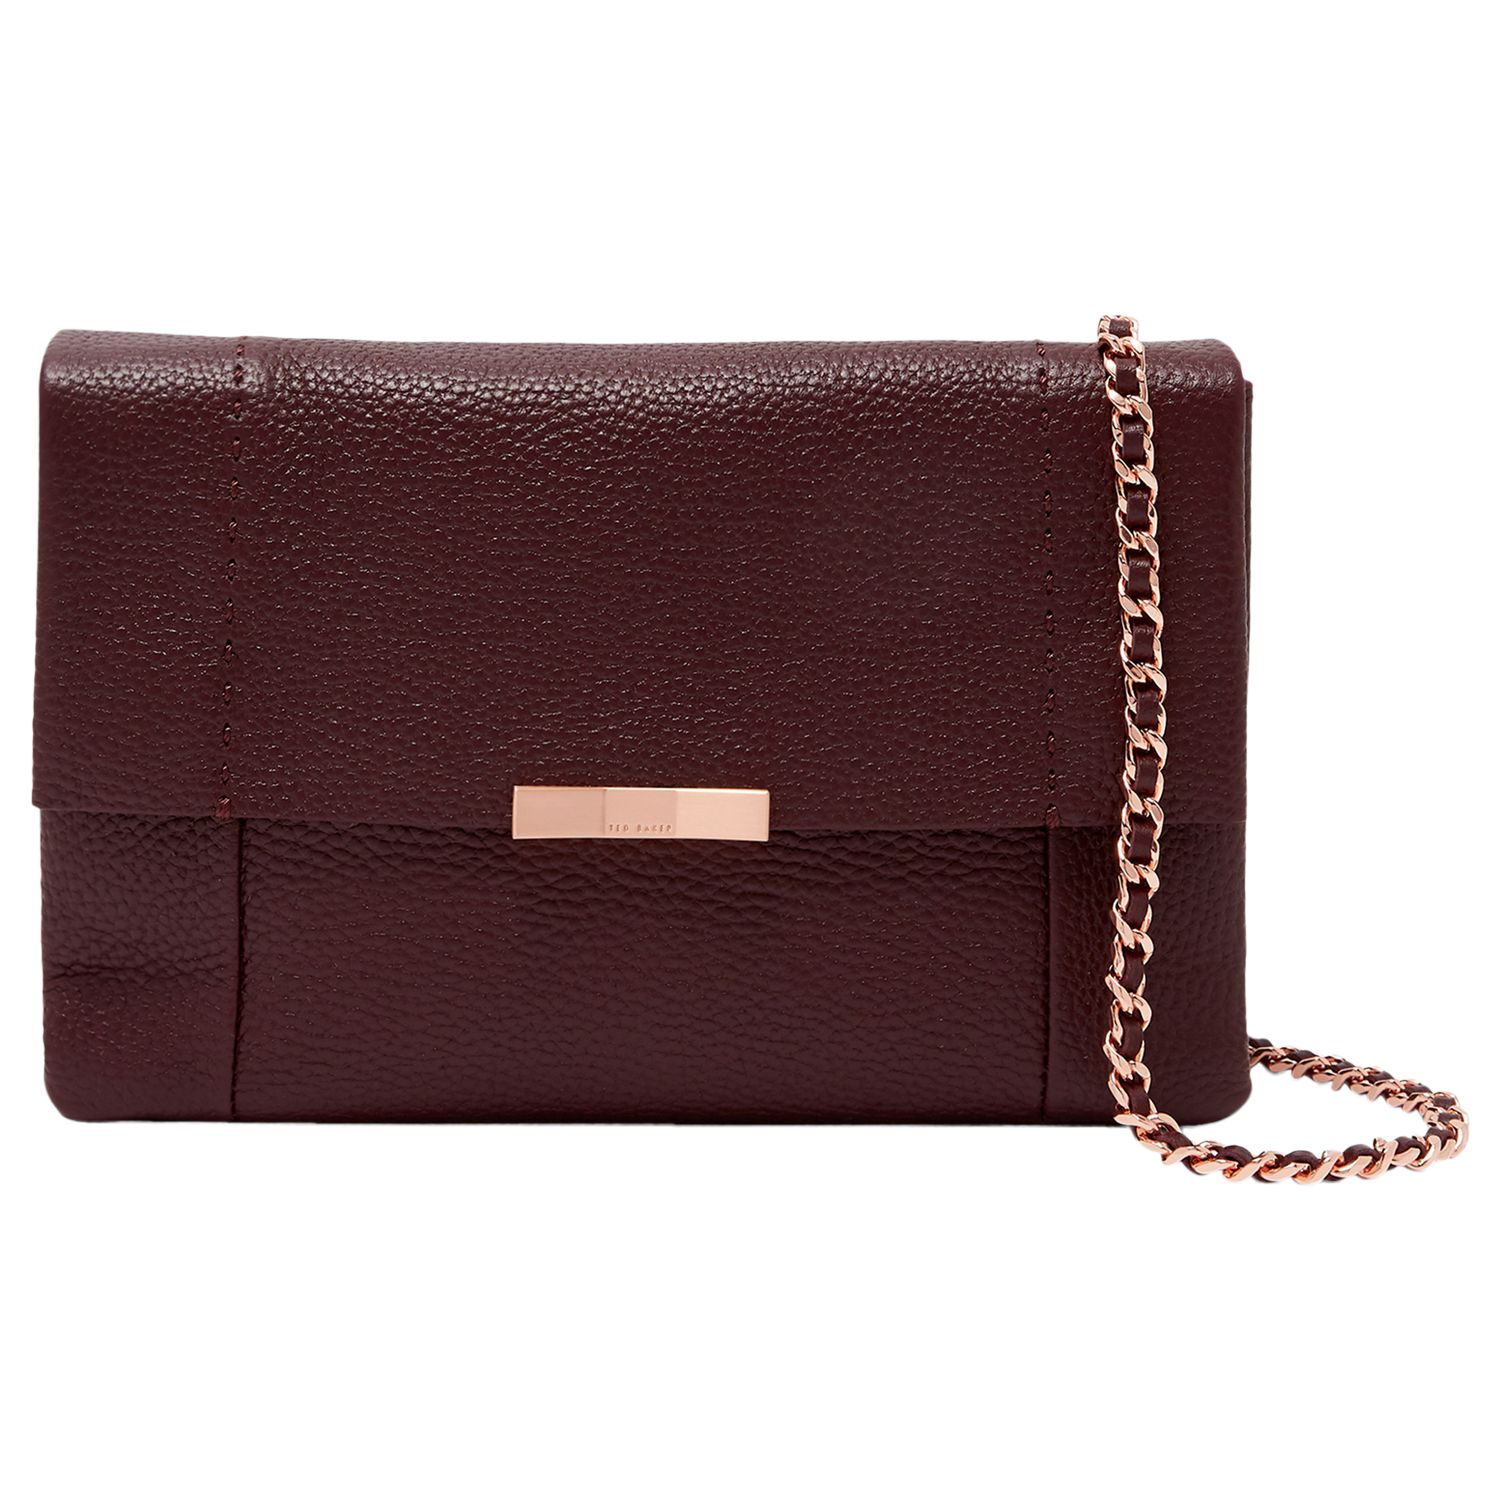 Ted Baker Clarria Leather Cross Body Bag